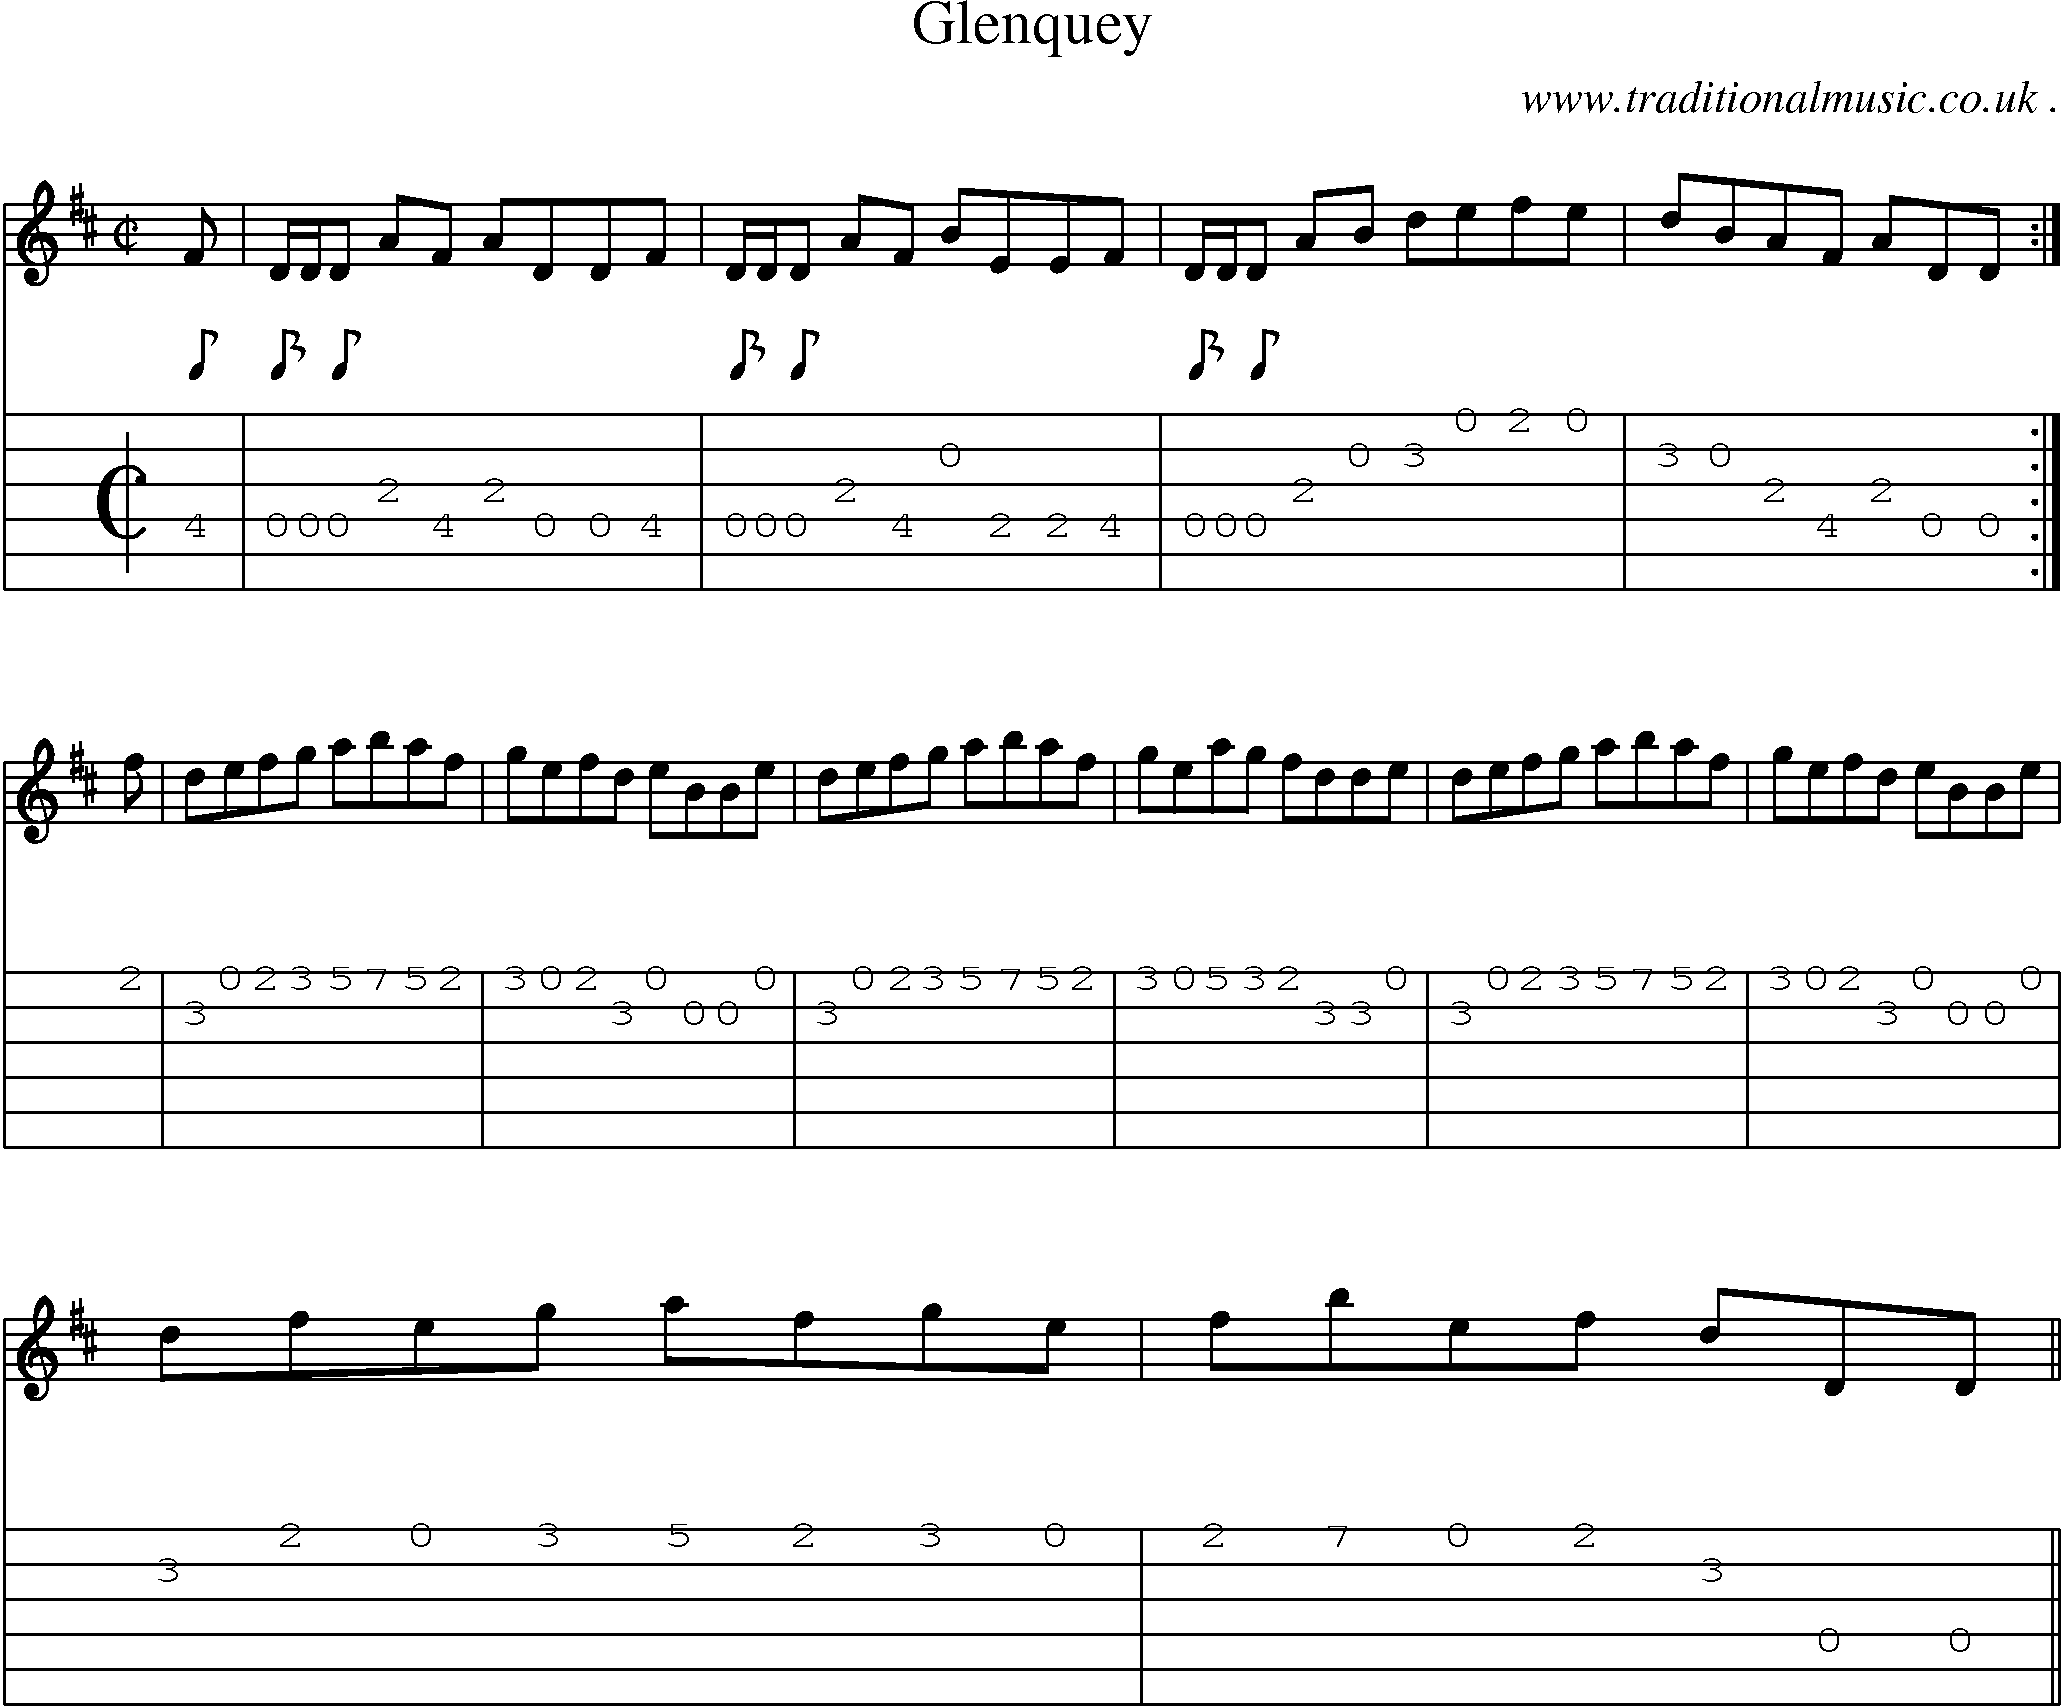 Sheet-music  score, Chords and Guitar Tabs for Glenquey